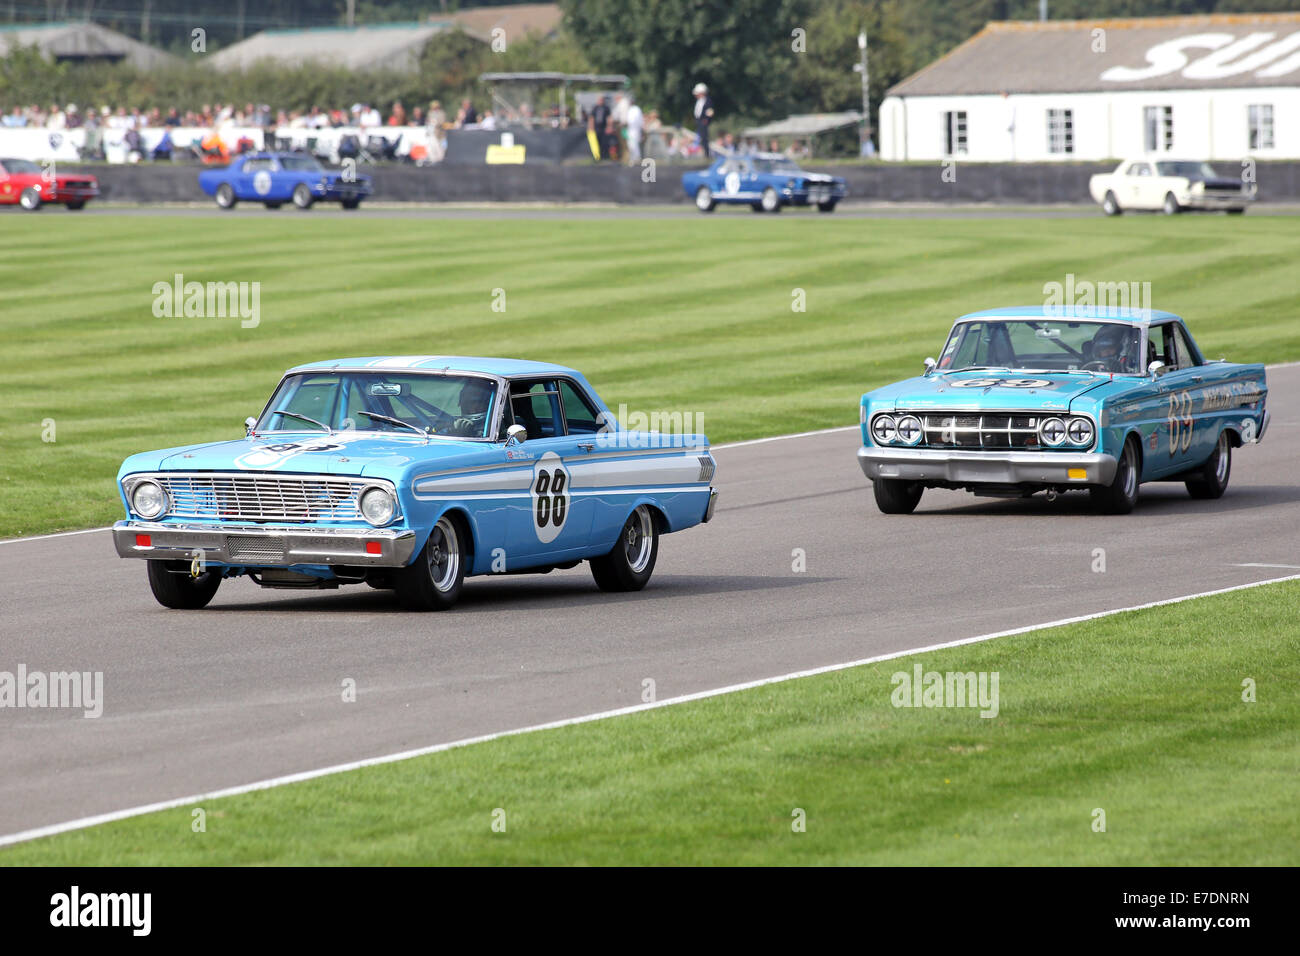 Chichester, West Sussex, UK. 13th Sep, 2014. Pictures from the Goodwood Revival 2014 - The Shelby Cup - A race for saloon cars powered by small-block V8 engines on the 60th anniversary of the small-block V8 engine. A large number of Ford Mustangs mariking the car's 50th anniversary took on other American classics such as Ford Falcon, Plymouth Barracuda, Mercury Comet Cyclone and Dodge Dart. Picture shows: Rob Hall driving a 1964 Ford Faclon Spirit Credit:  Oliver Dixon/Alamy Live News Stock Photo